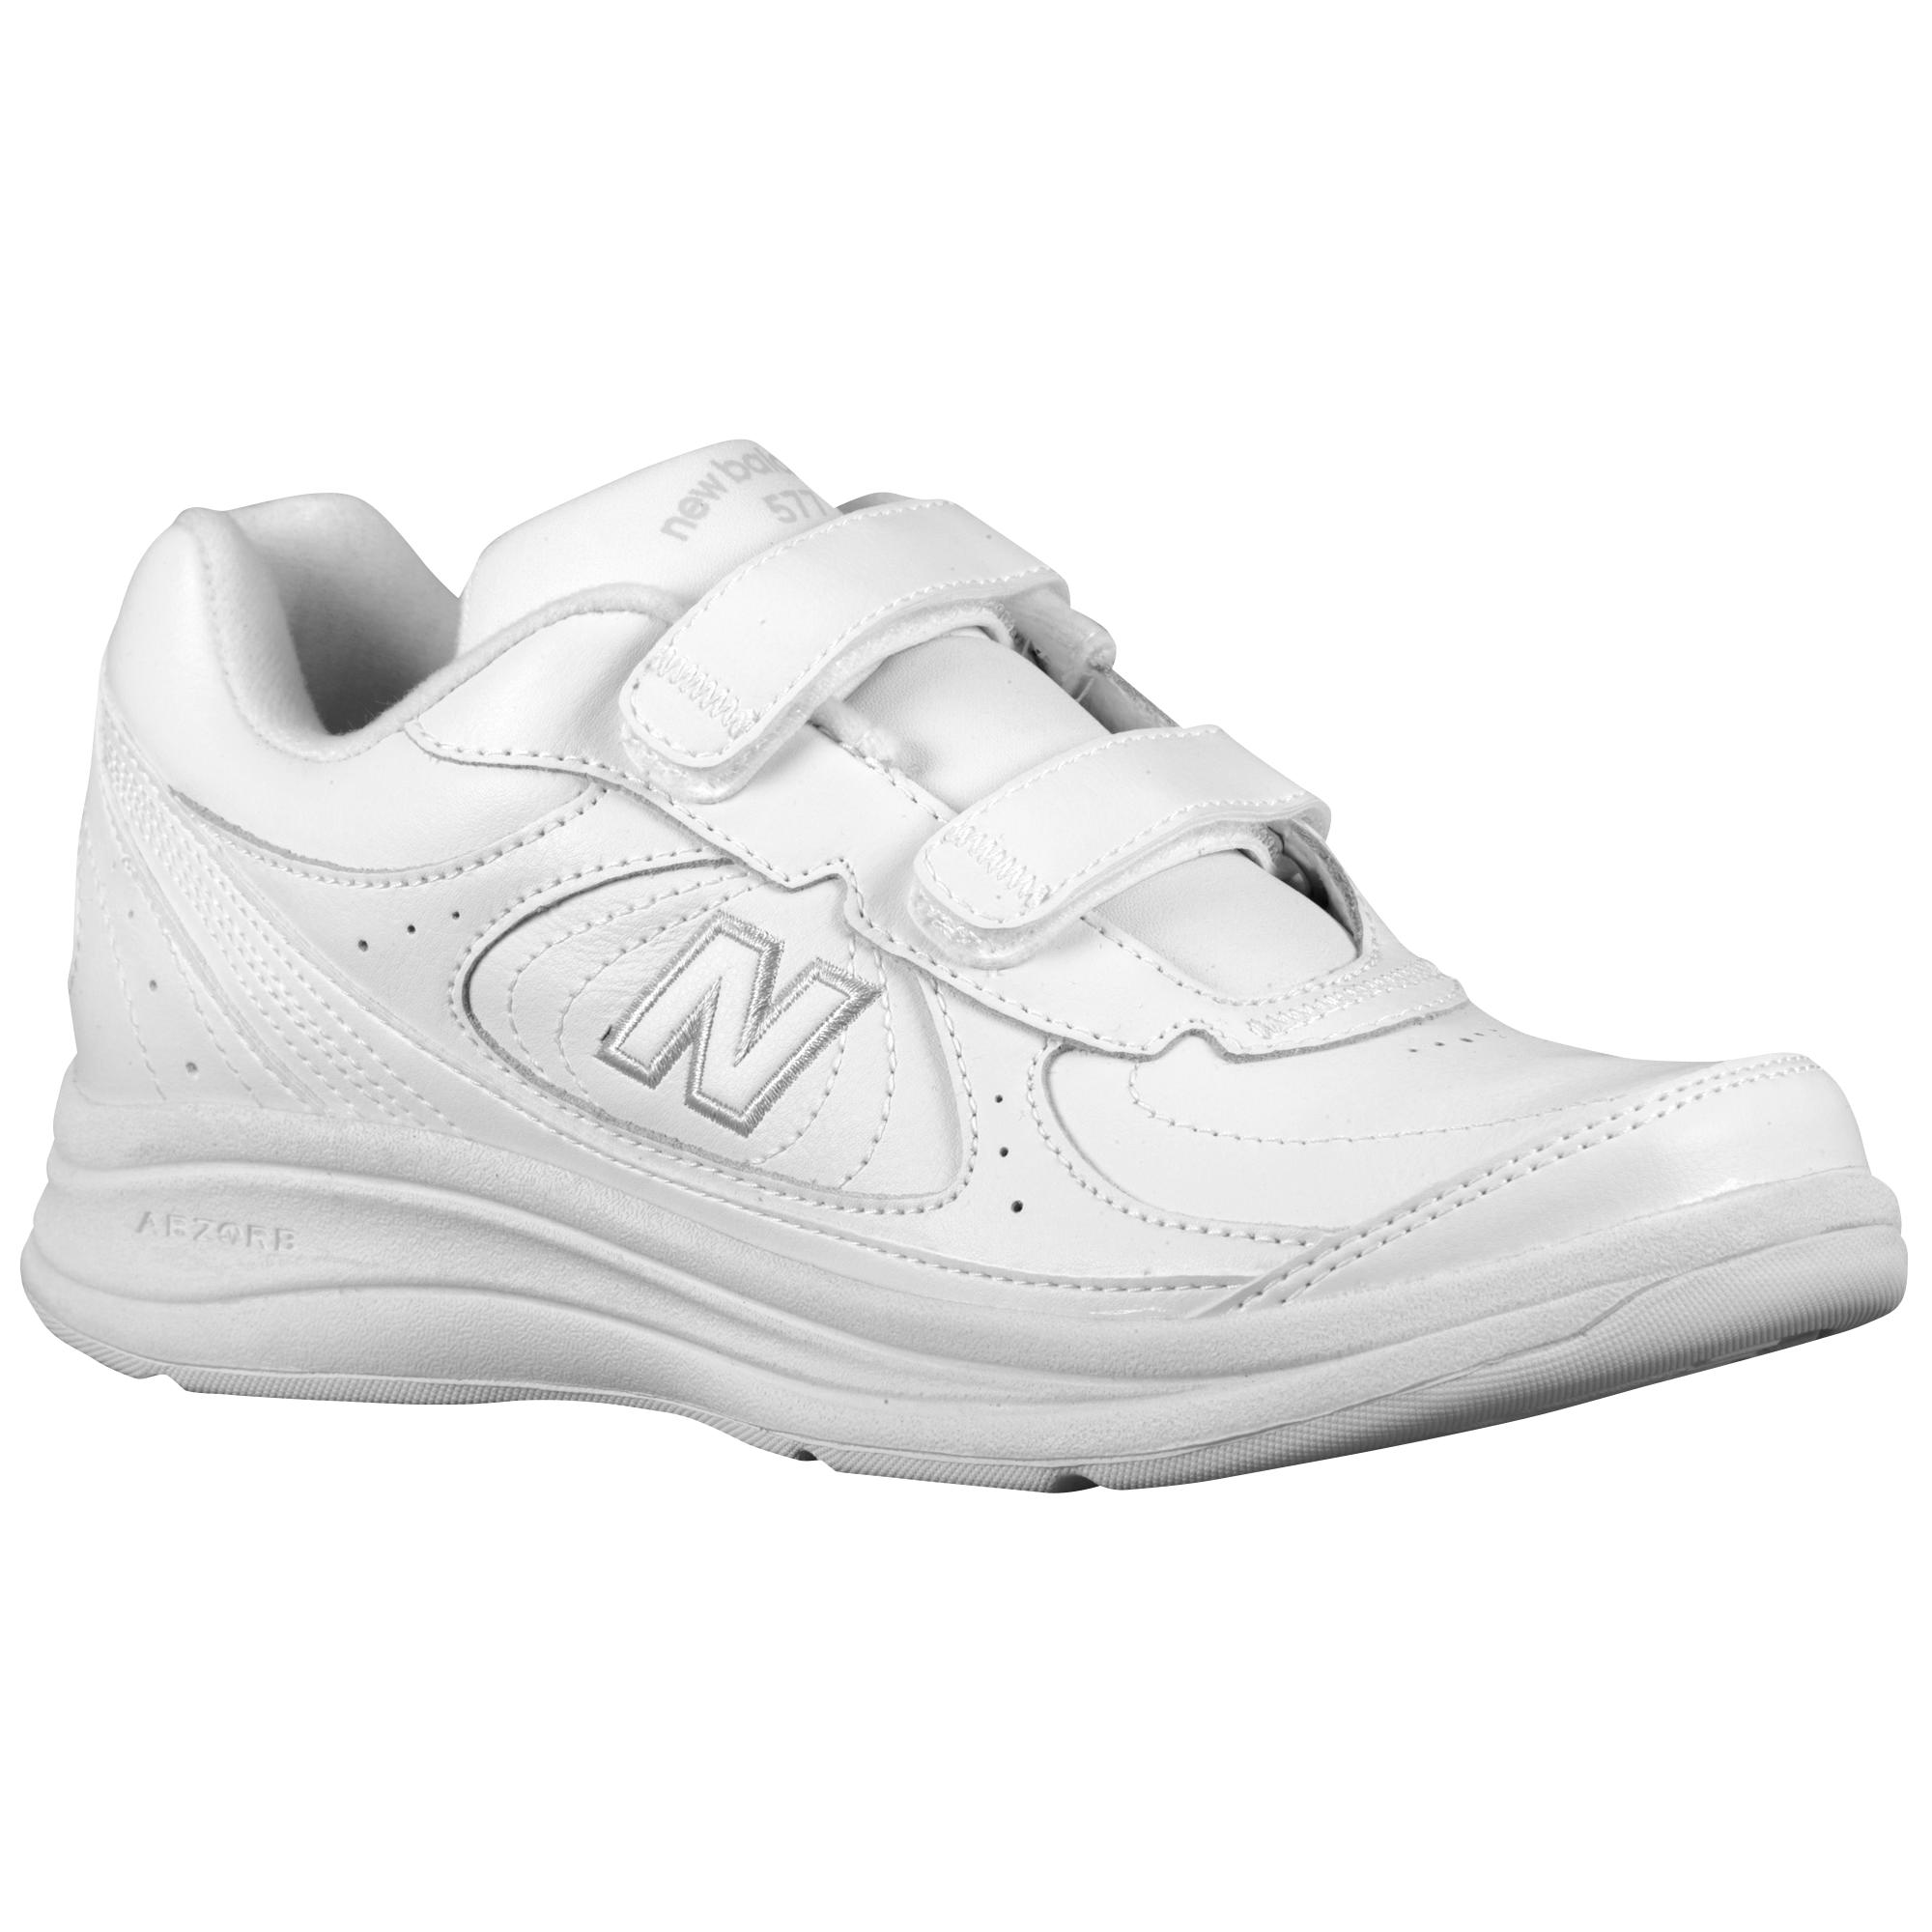 New Balance Leather 577 Hook & Loop Running Shoes in White - Lyst